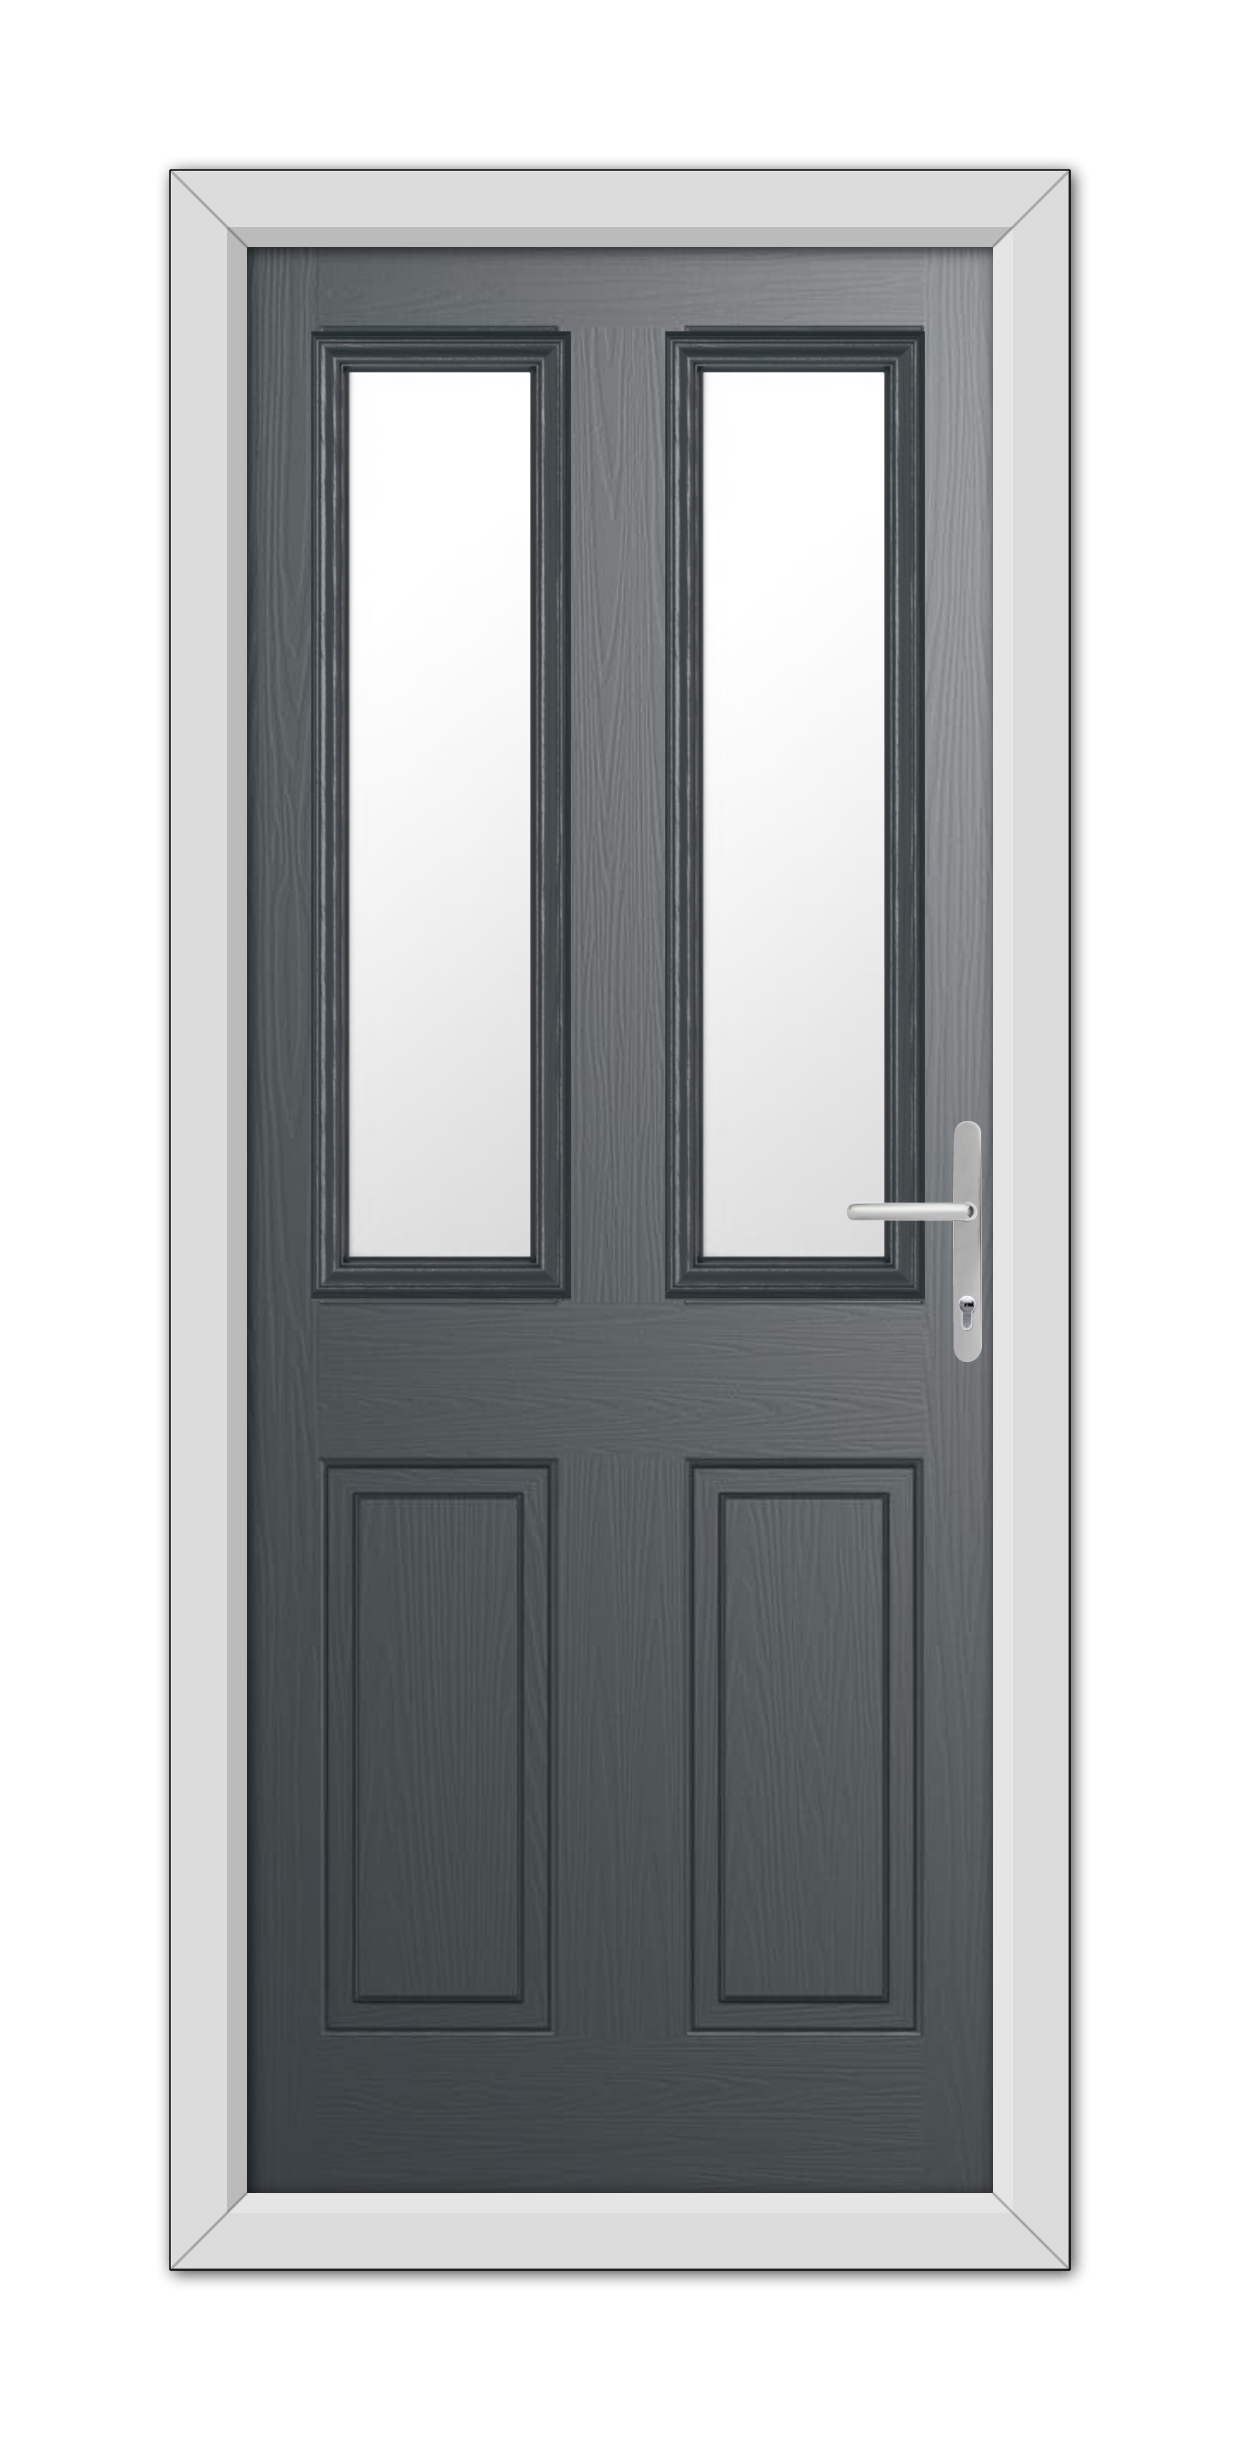 Anthracite Grey Whitmore Composite Door 48mm Timber Core entry door with long vertical windows and a silver handle, set in a white frame.